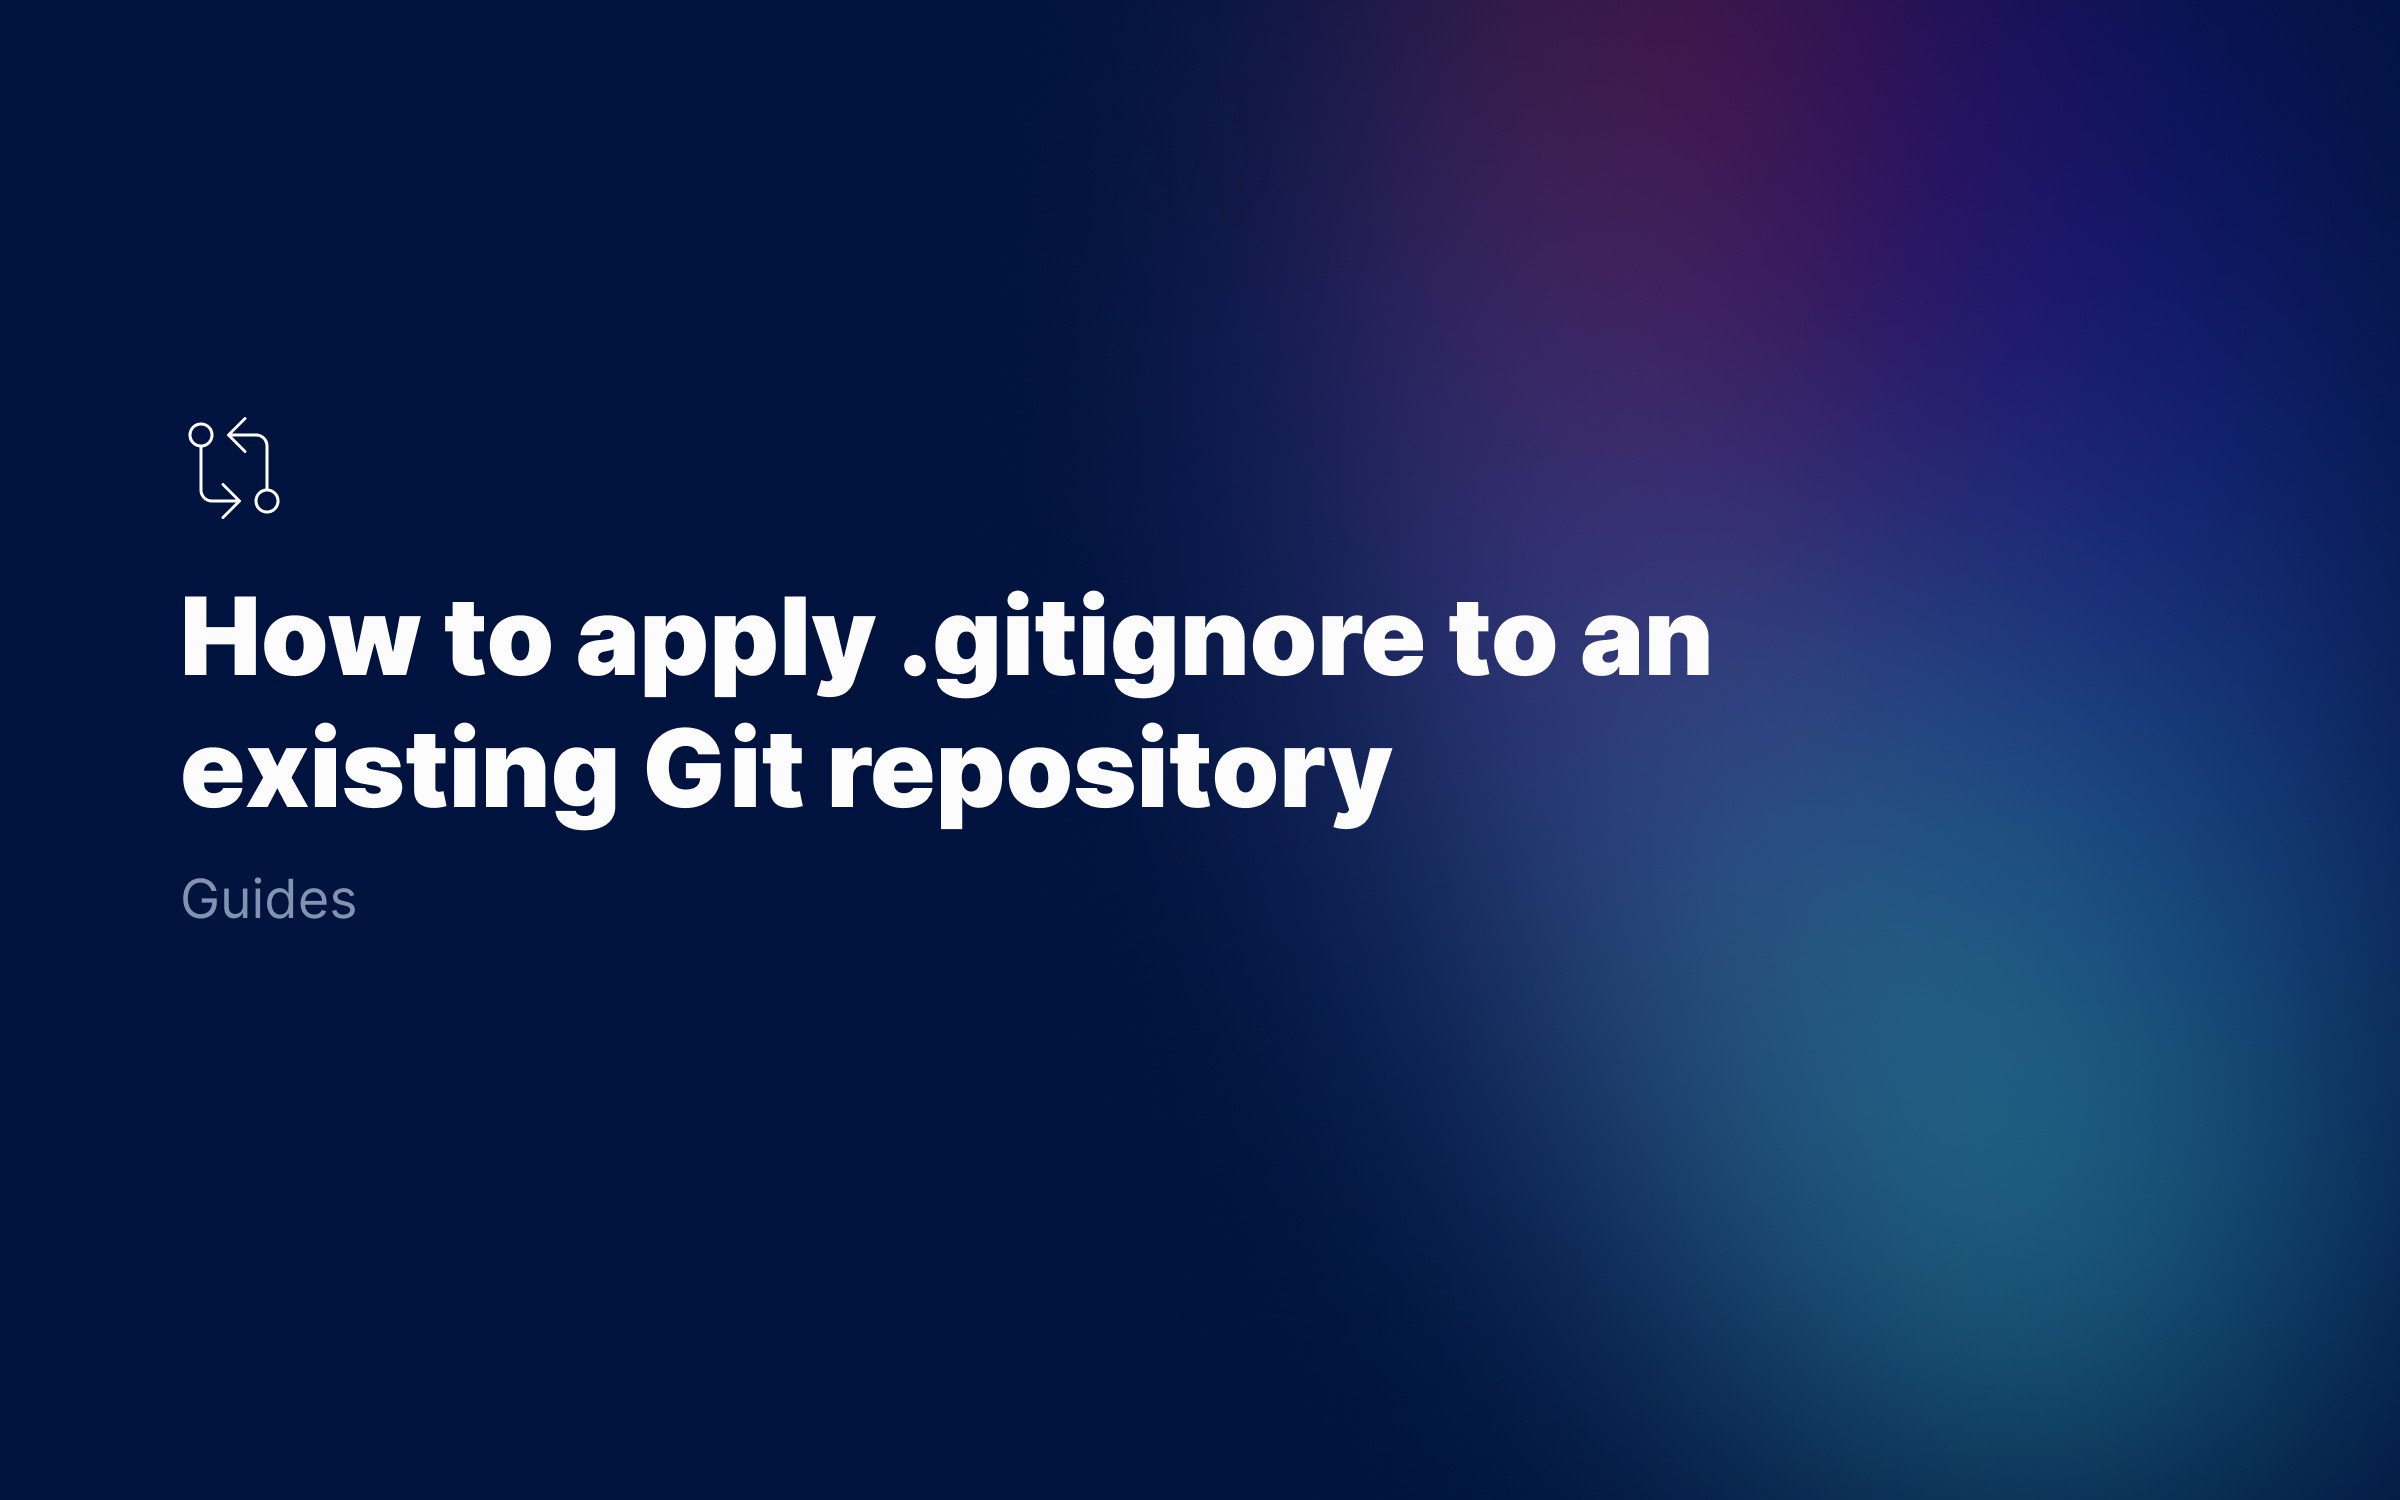 How to apply .gitignore to an existing Git repository